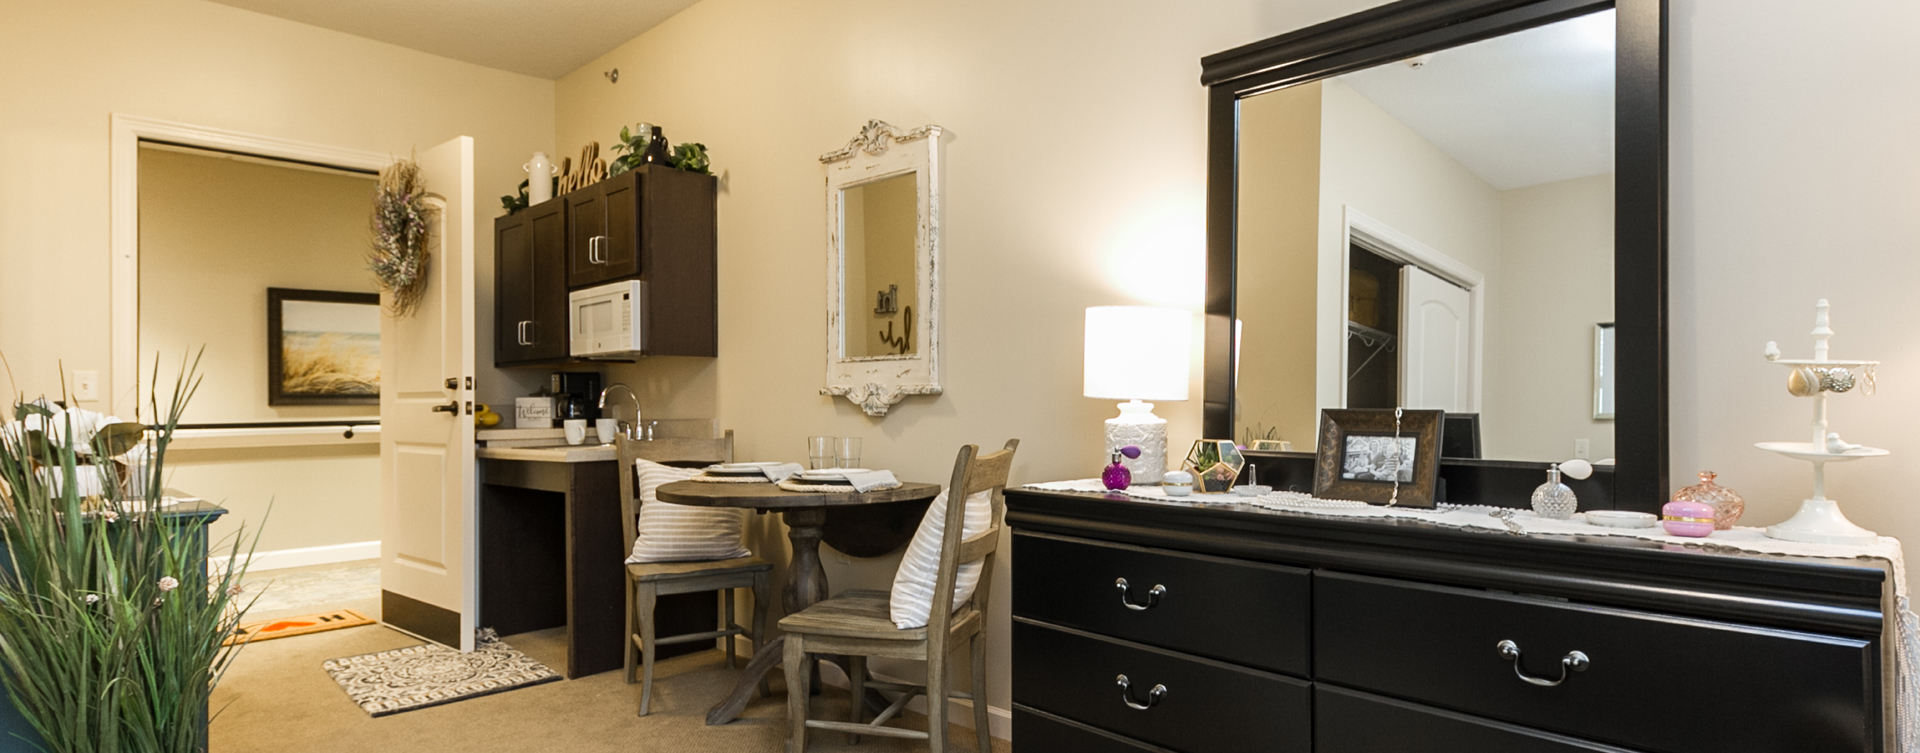 Enjoy senior friendly amenities, personal climate control and security in an apartment at Bickford of Virginia Beach